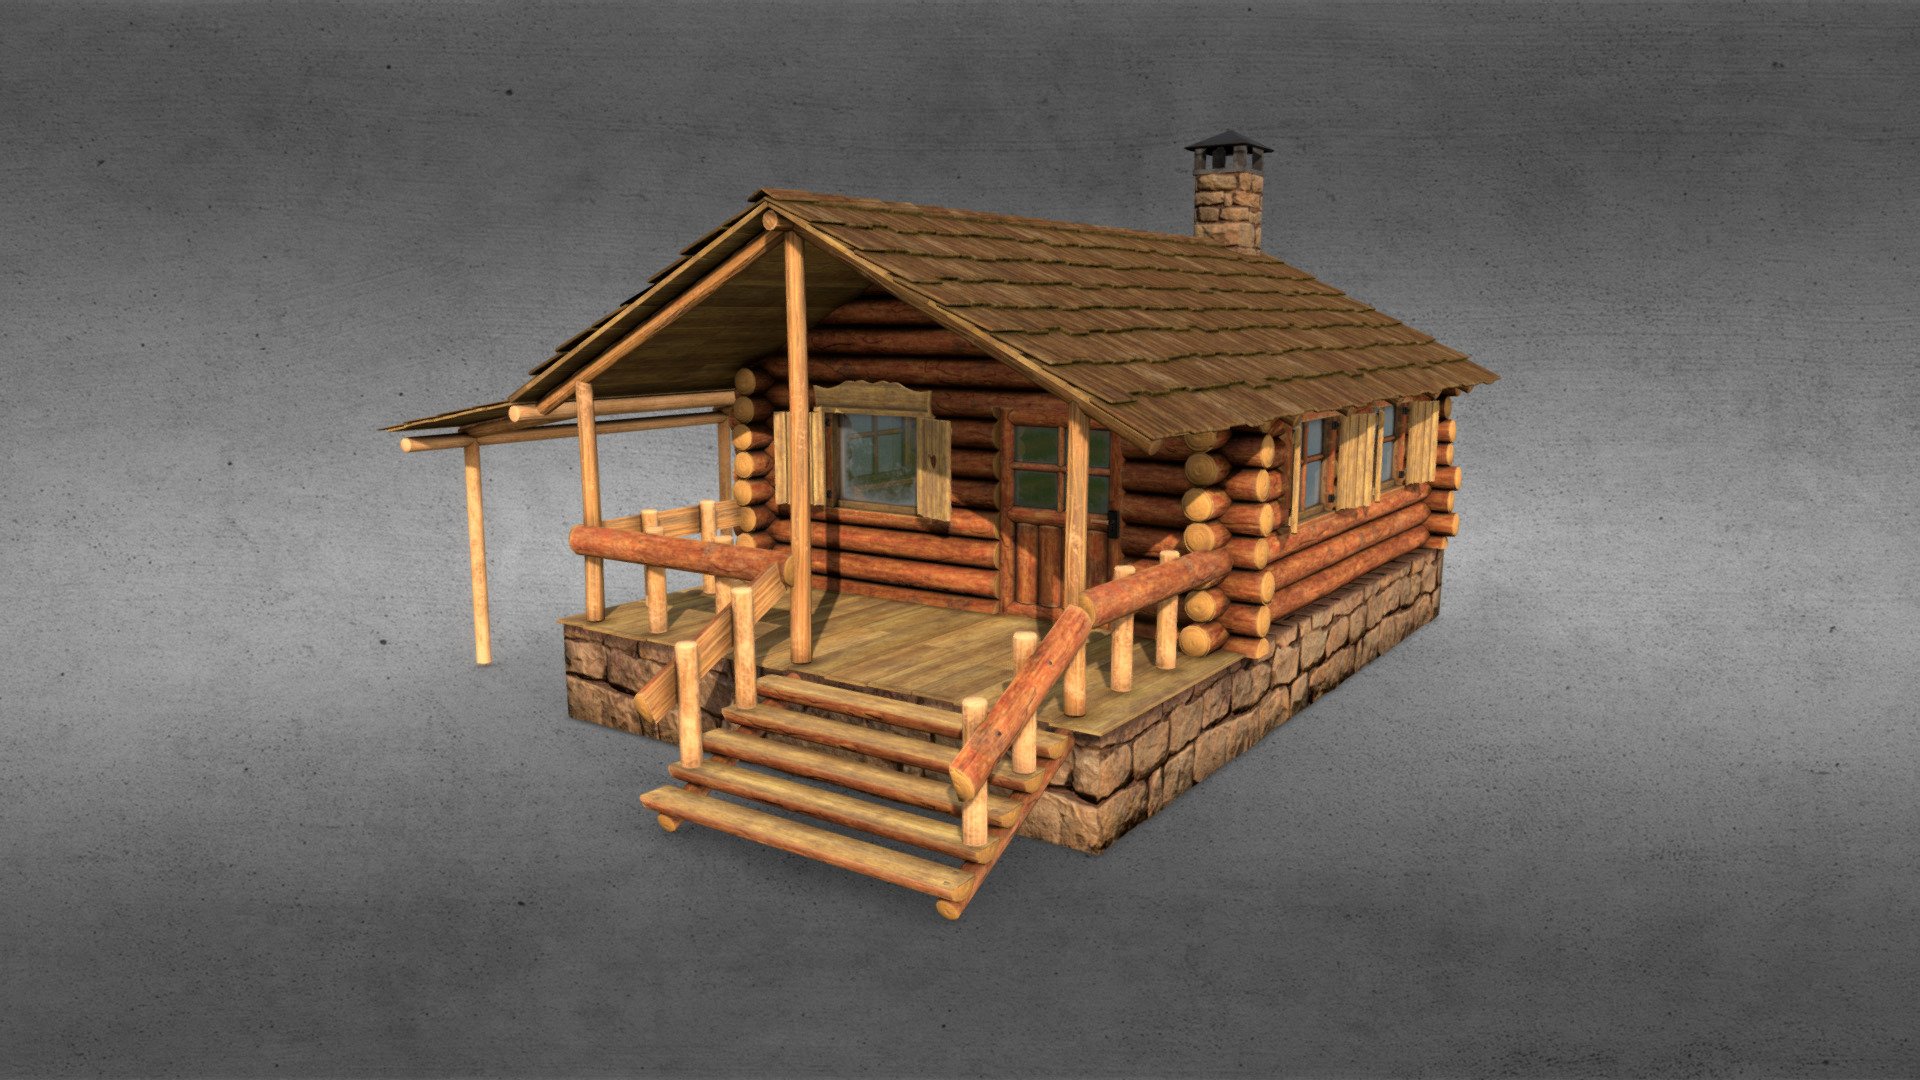 Introducing log cabin with interior and various props:

Features:




Walkable interior, good for VR/FPS experience,

Fireplace included,

Doors included,

Transparent windows included,

Window shutters included.

For support or other information please send us an e-mail at ** info@sunbox.games**

Check out our other work at sunbox.games - Small Log Cabin with Interior - Buy Royalty Free 3D model by Sunbox Games (@sunboxgames) 3d model